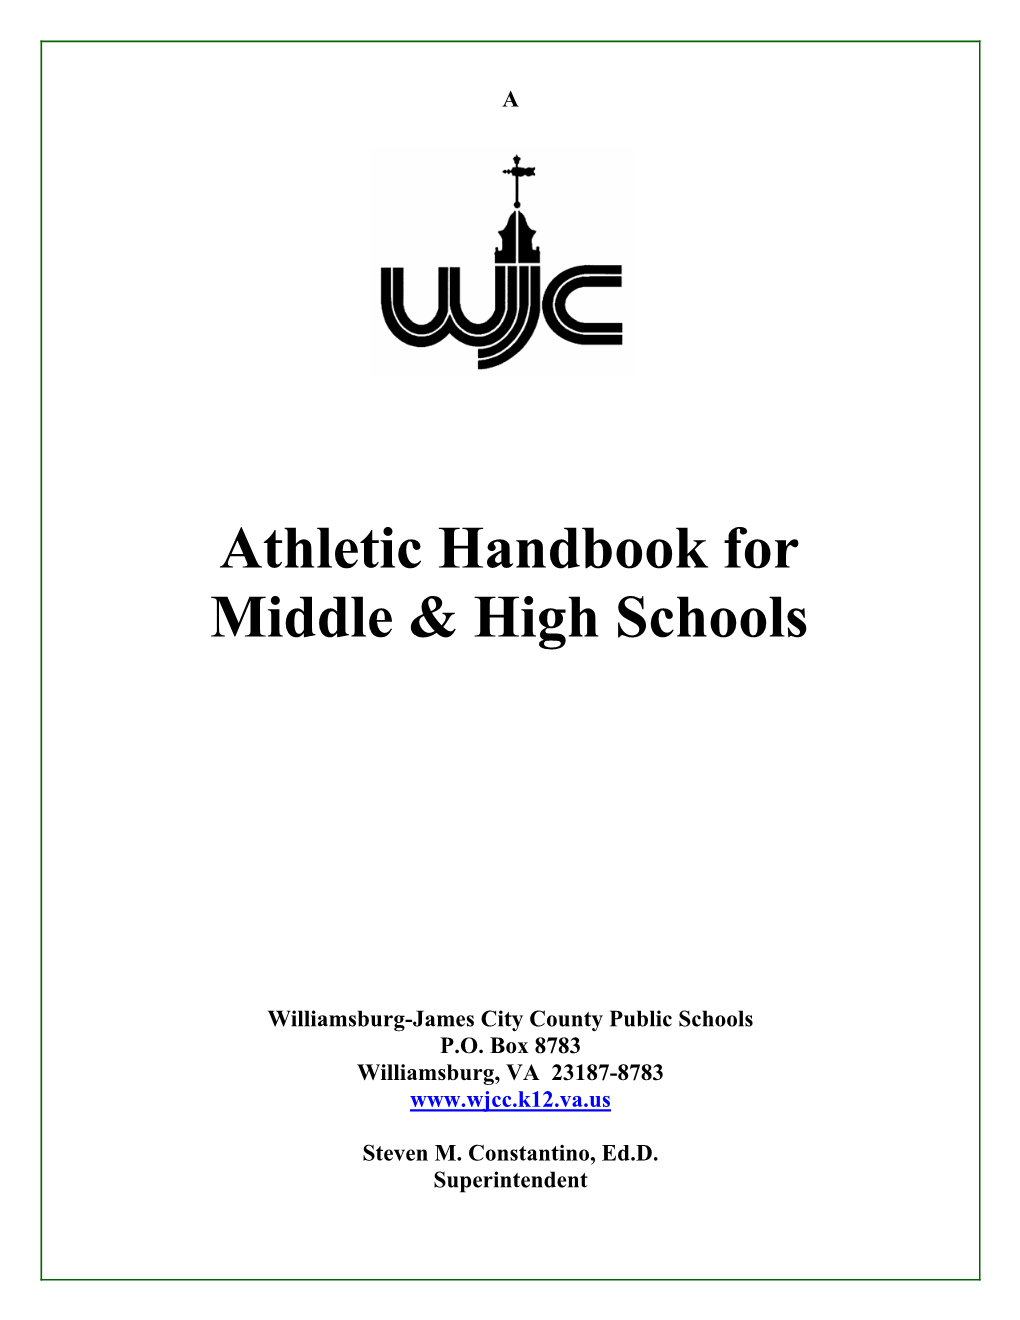 Athletic Handbook for Middle & High Schools